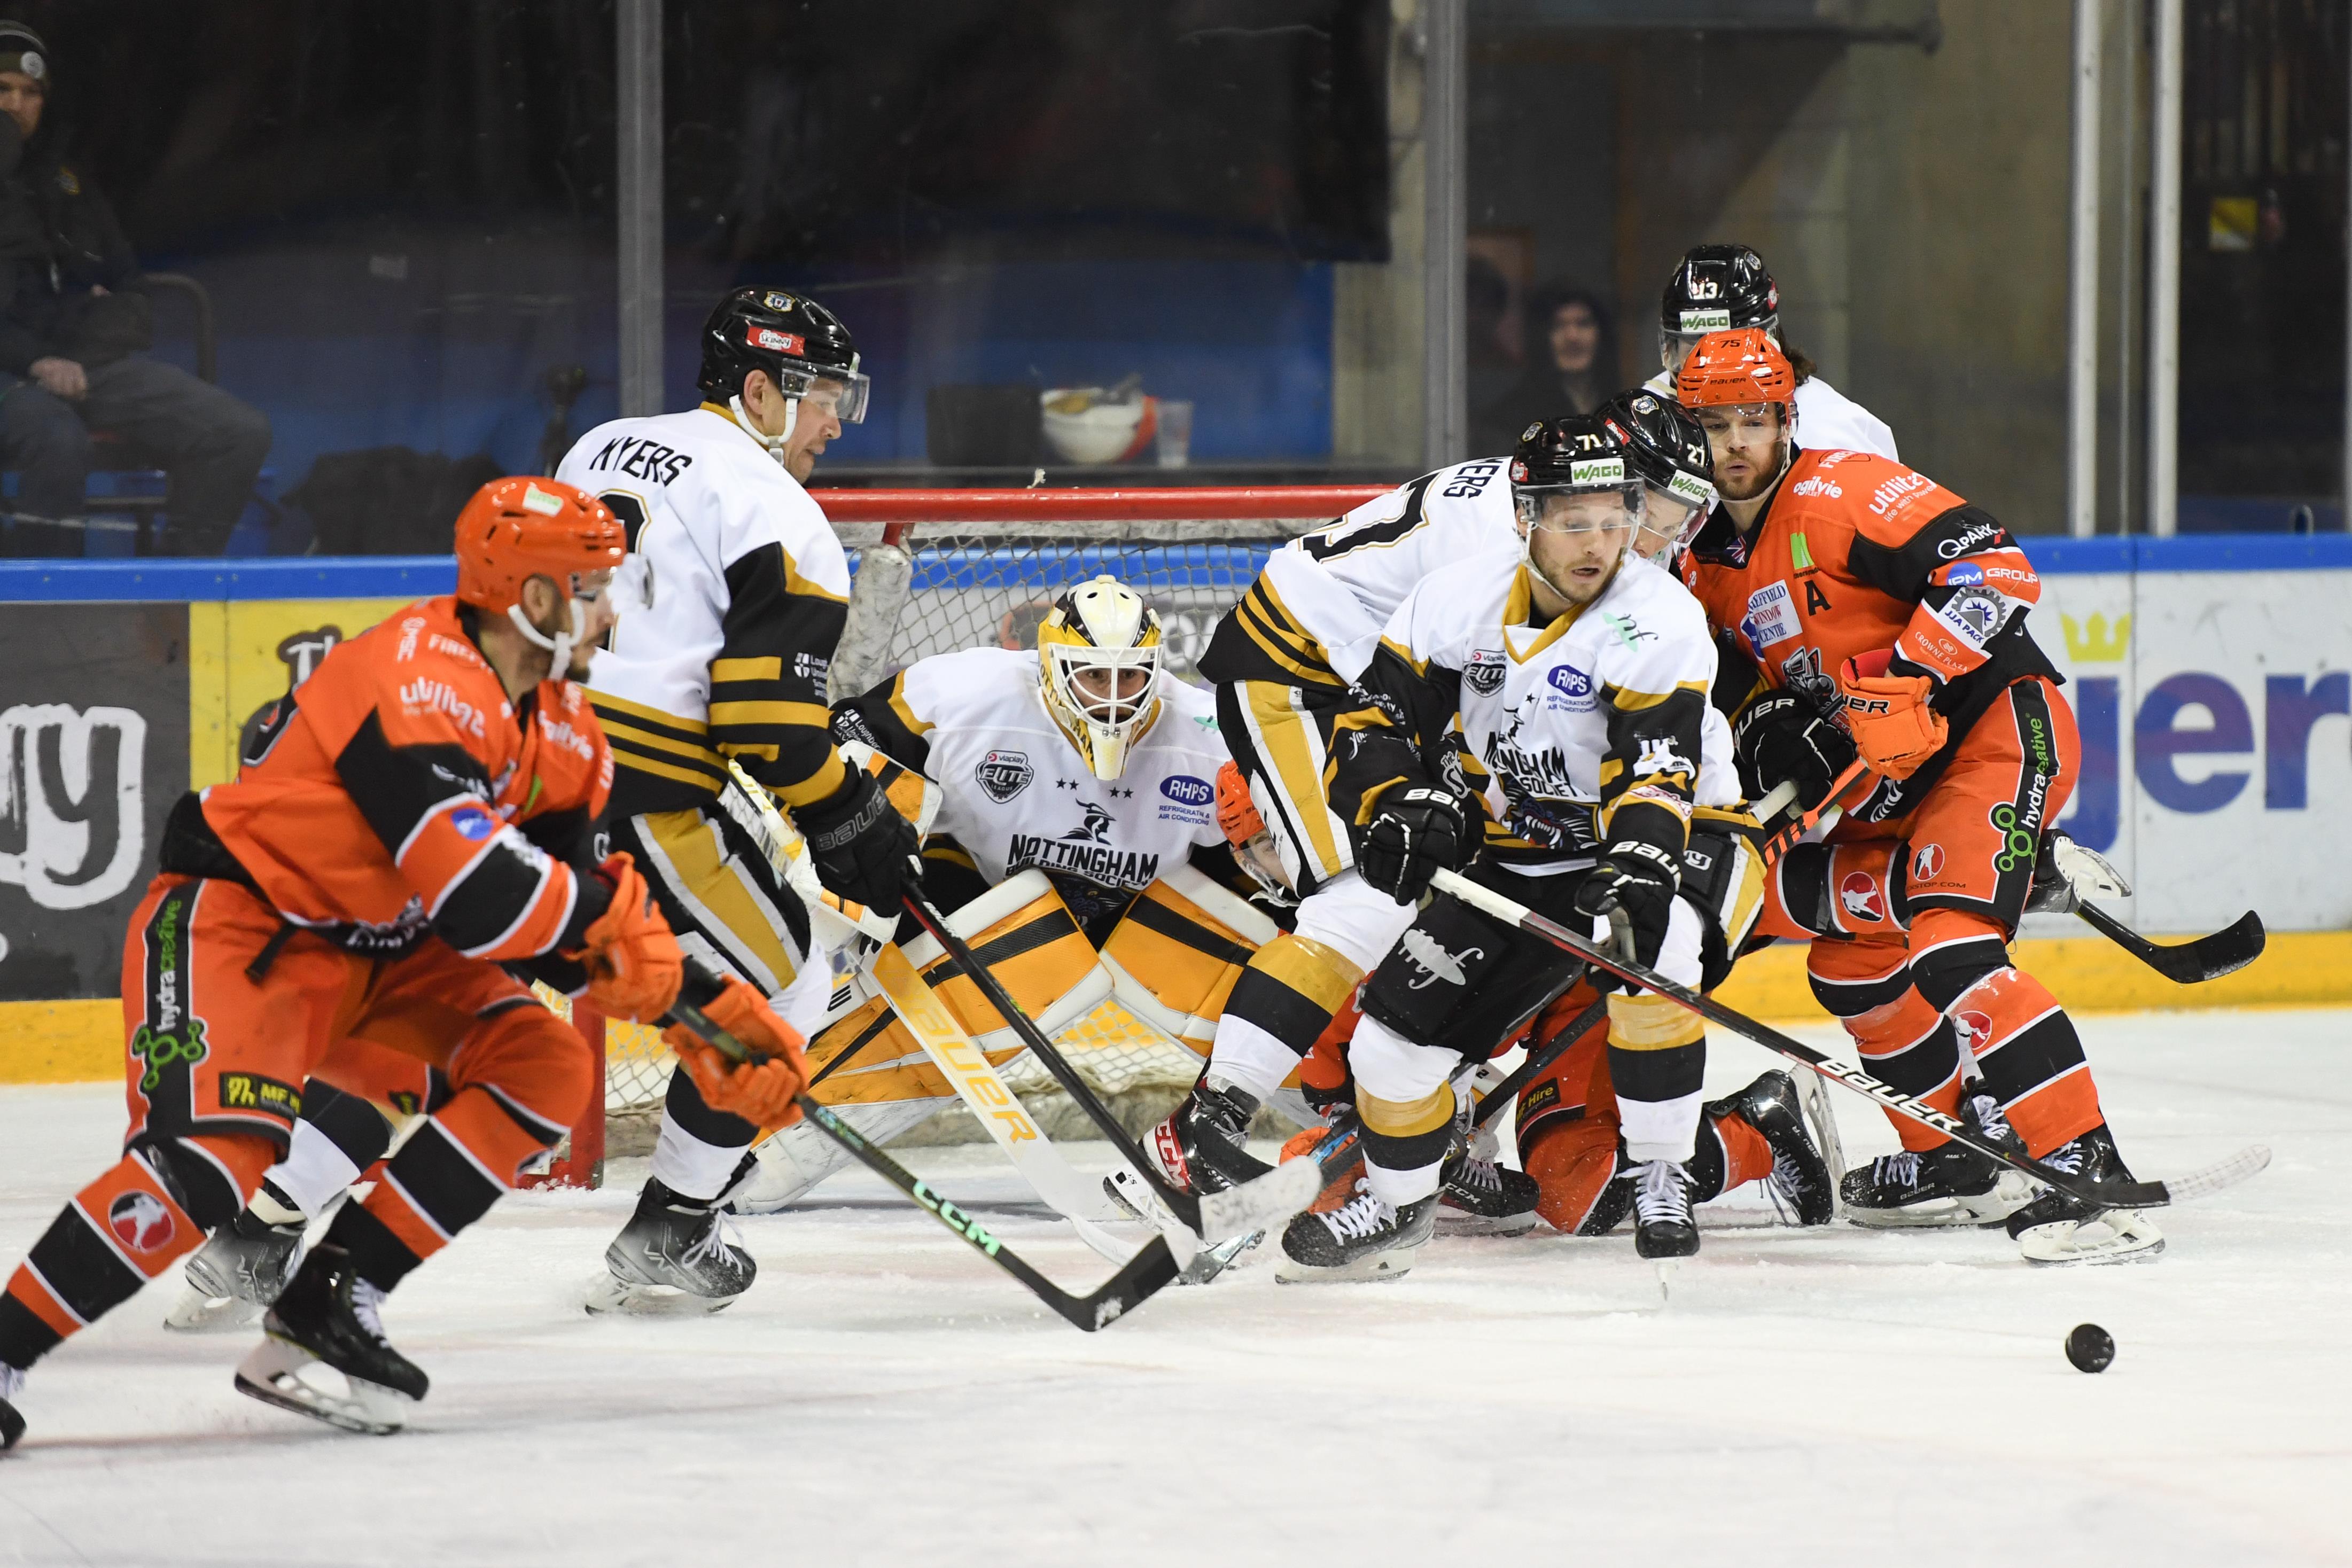 HIGHLIGHTS FROM TUESDAY'S GAME WITH STEELERS Top Image